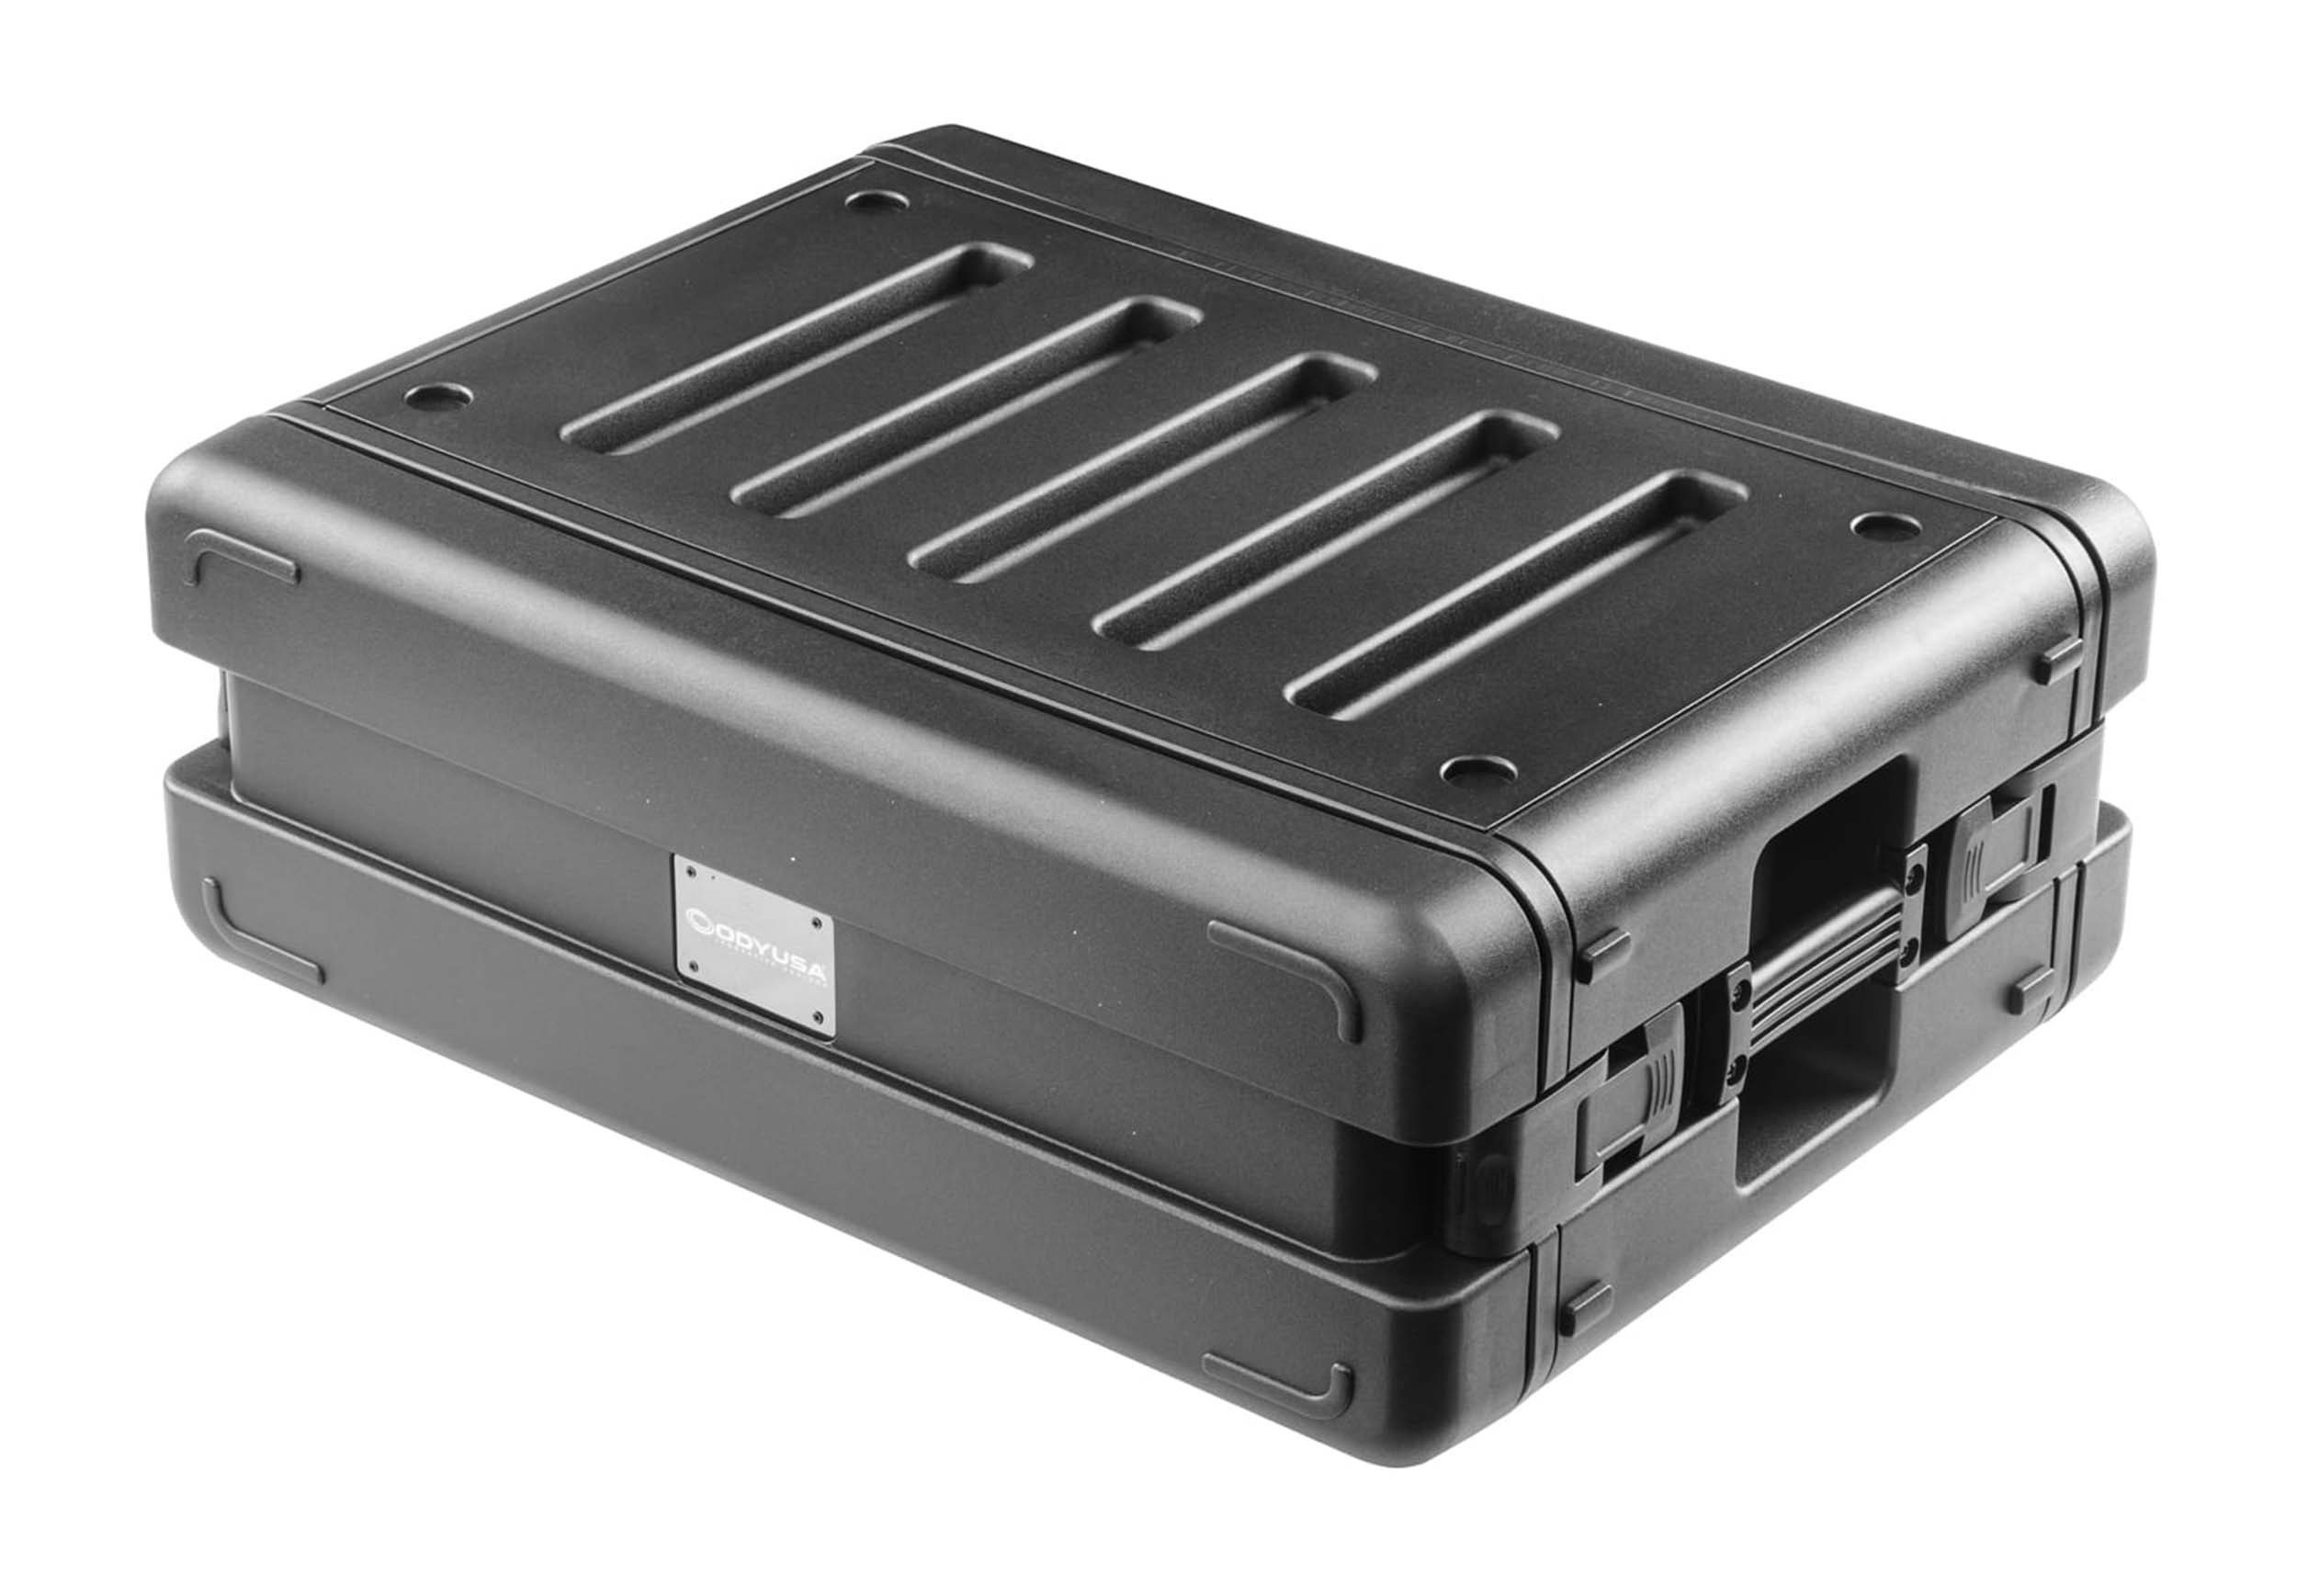 Odyssey VR3SMIC4ZP, Watertight 3U Rack Case with 4 Microphone Compartments Odyssey